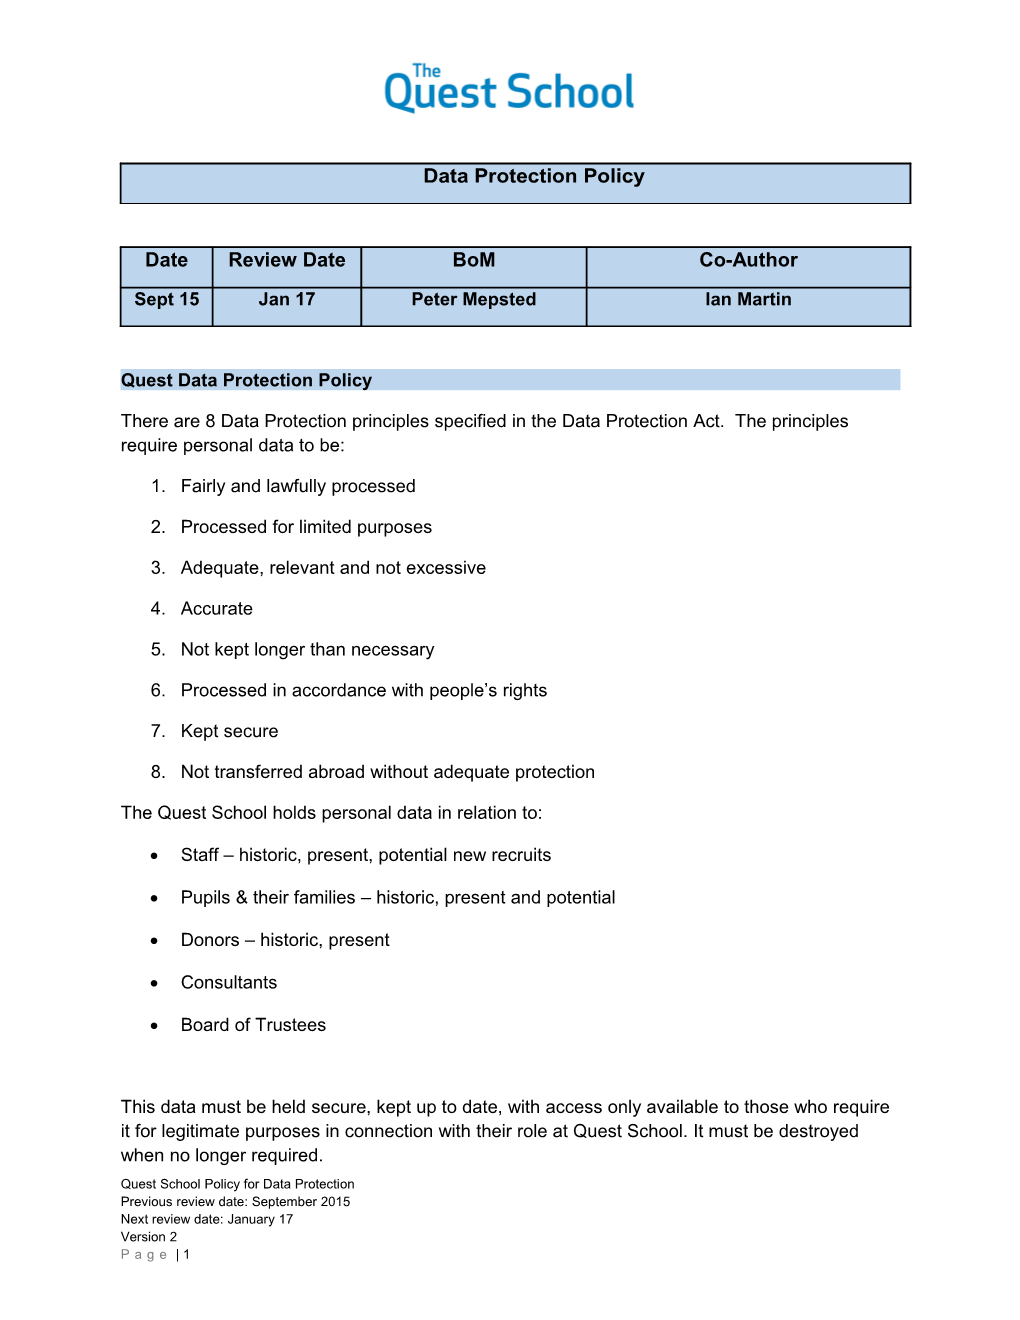 Quest Data Protection Policy